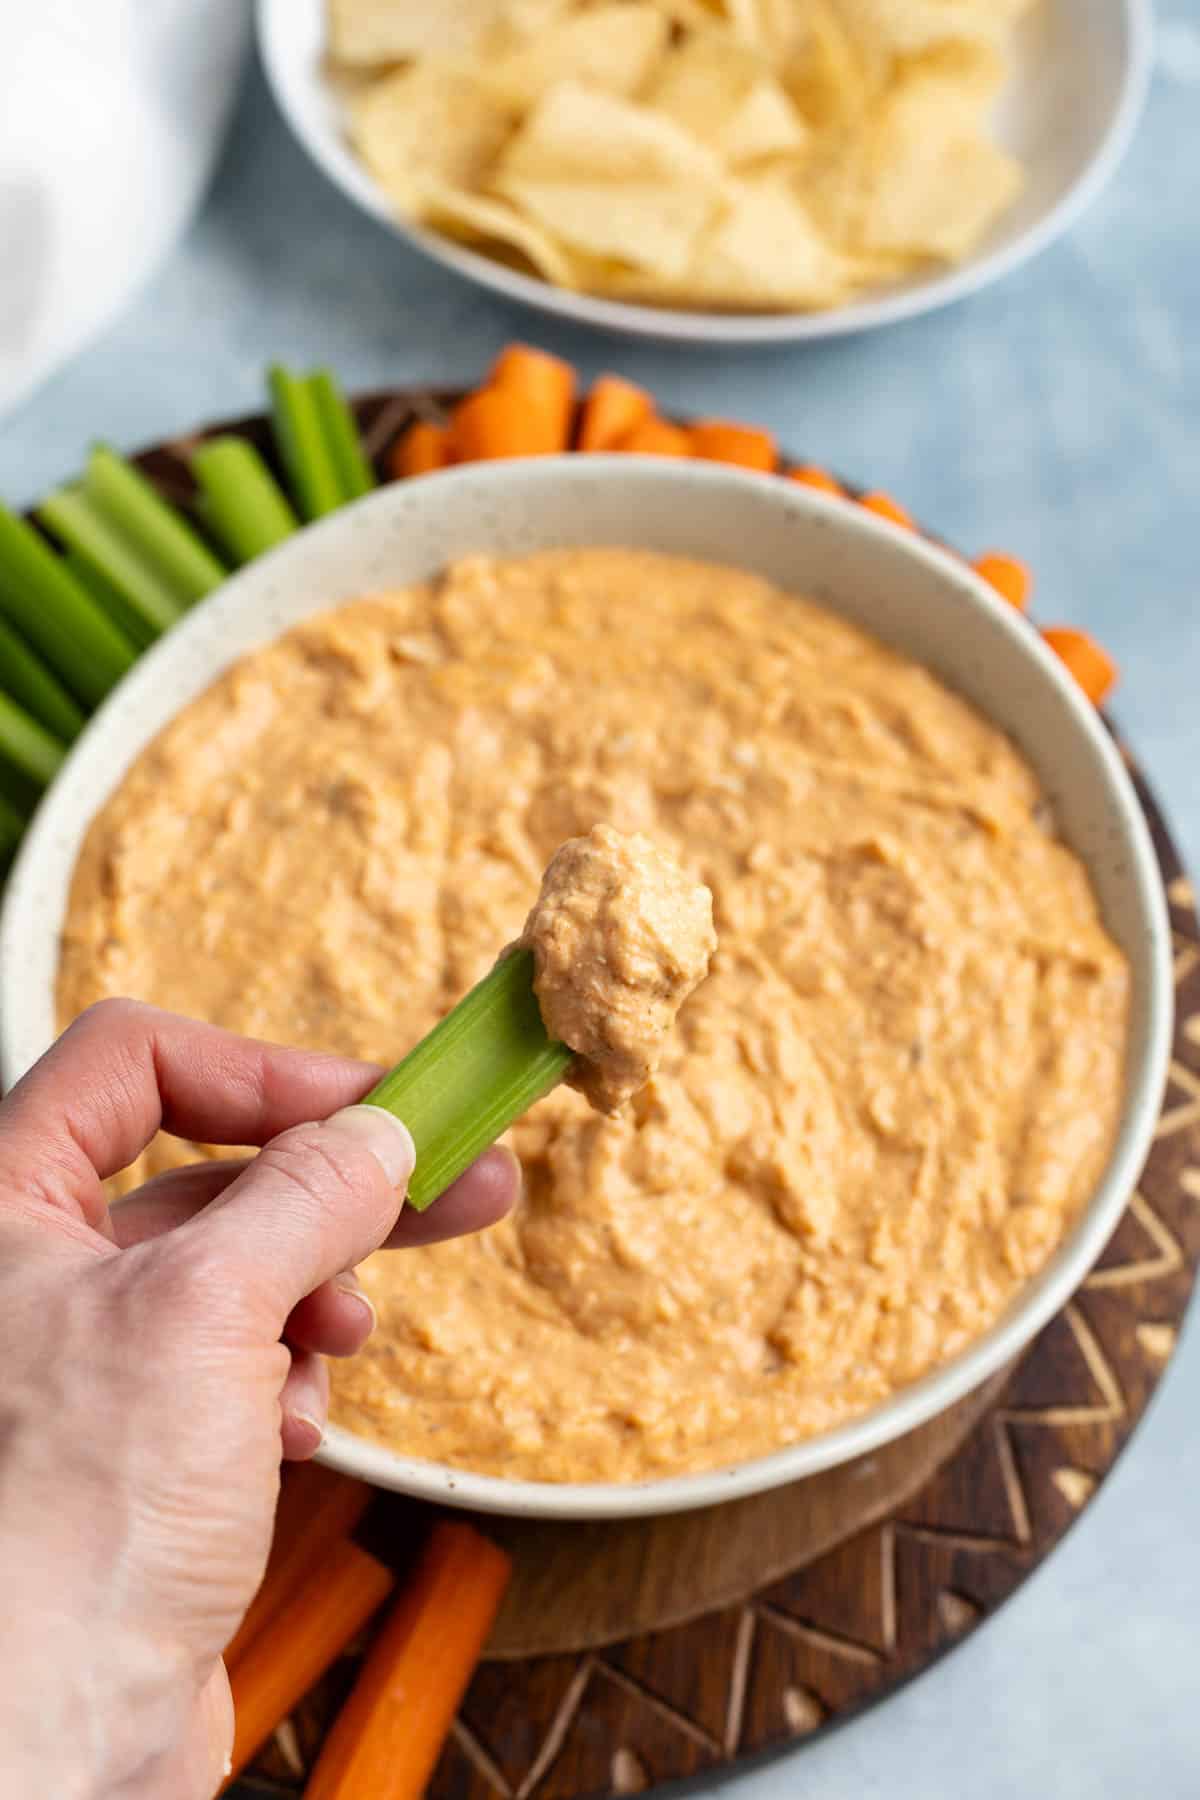 A hand holding up a celery stick with a dollop of buffalo chicken dip.